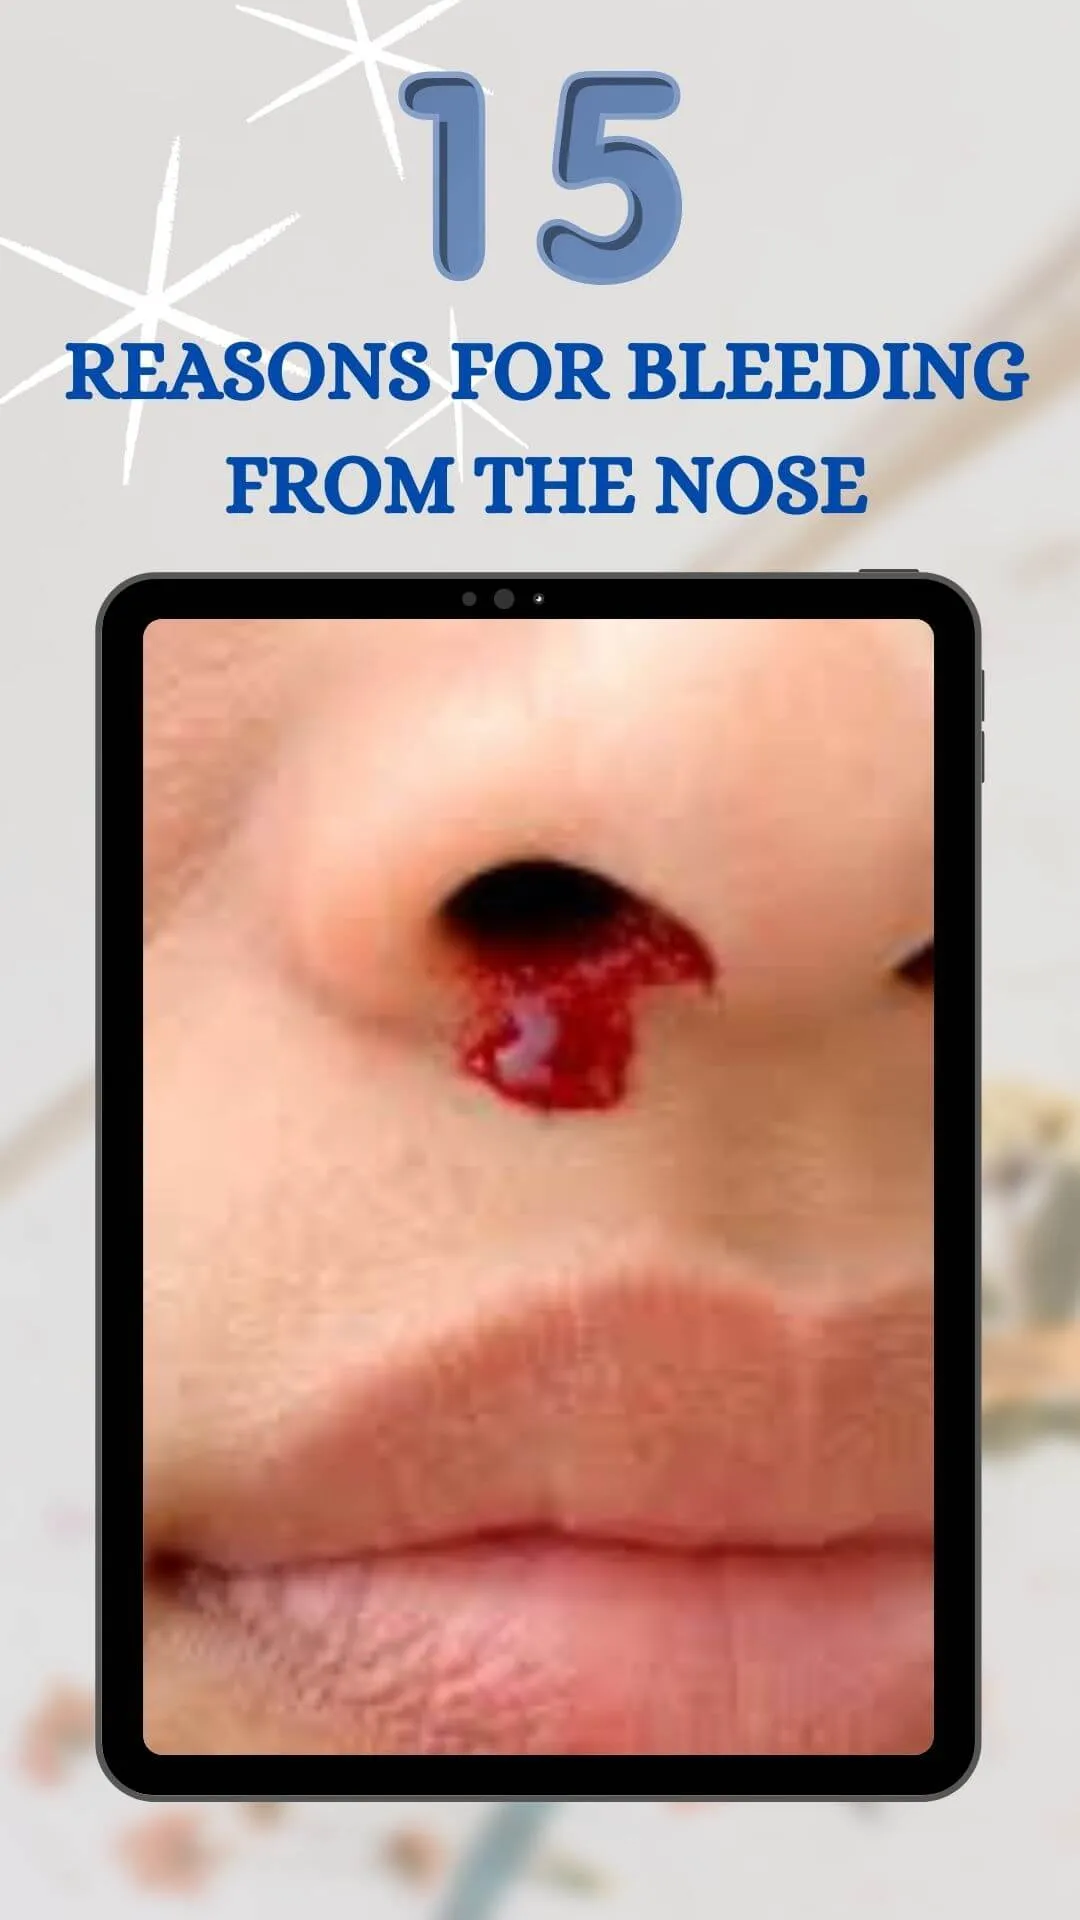 15 Reasons for Bleeding From The Nose